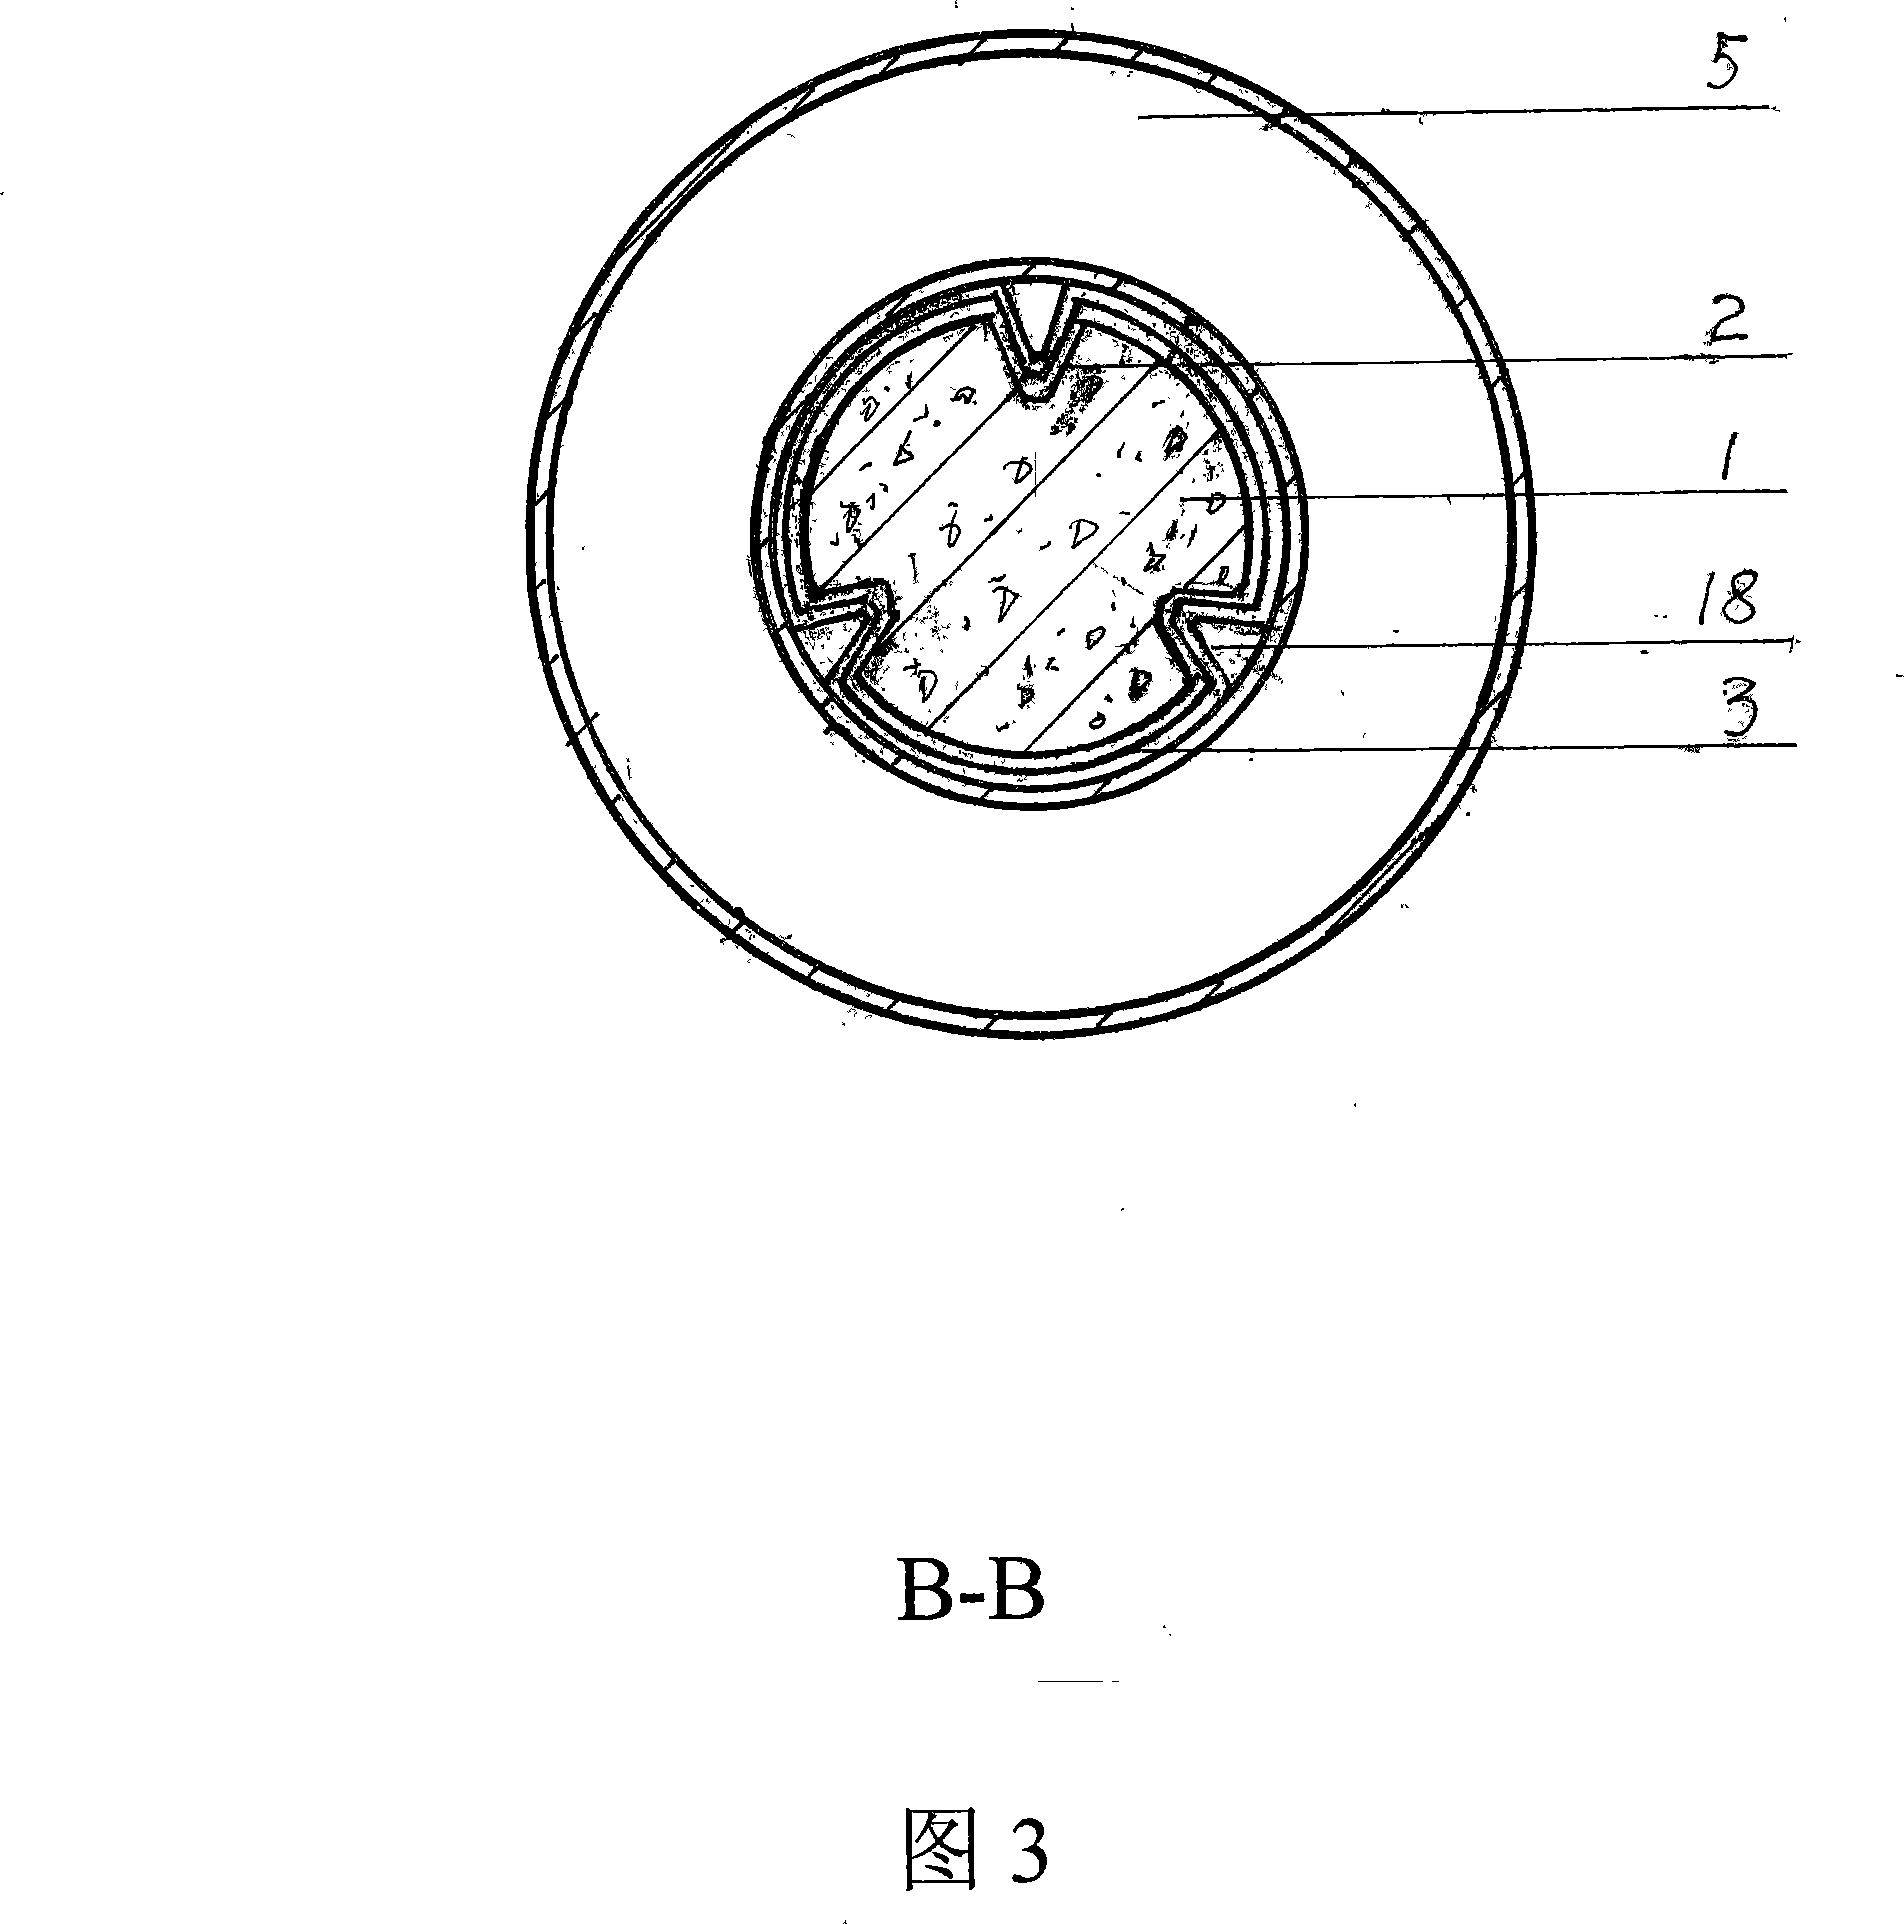 To-and-fro water pump type voltage transformation tidal power generating device